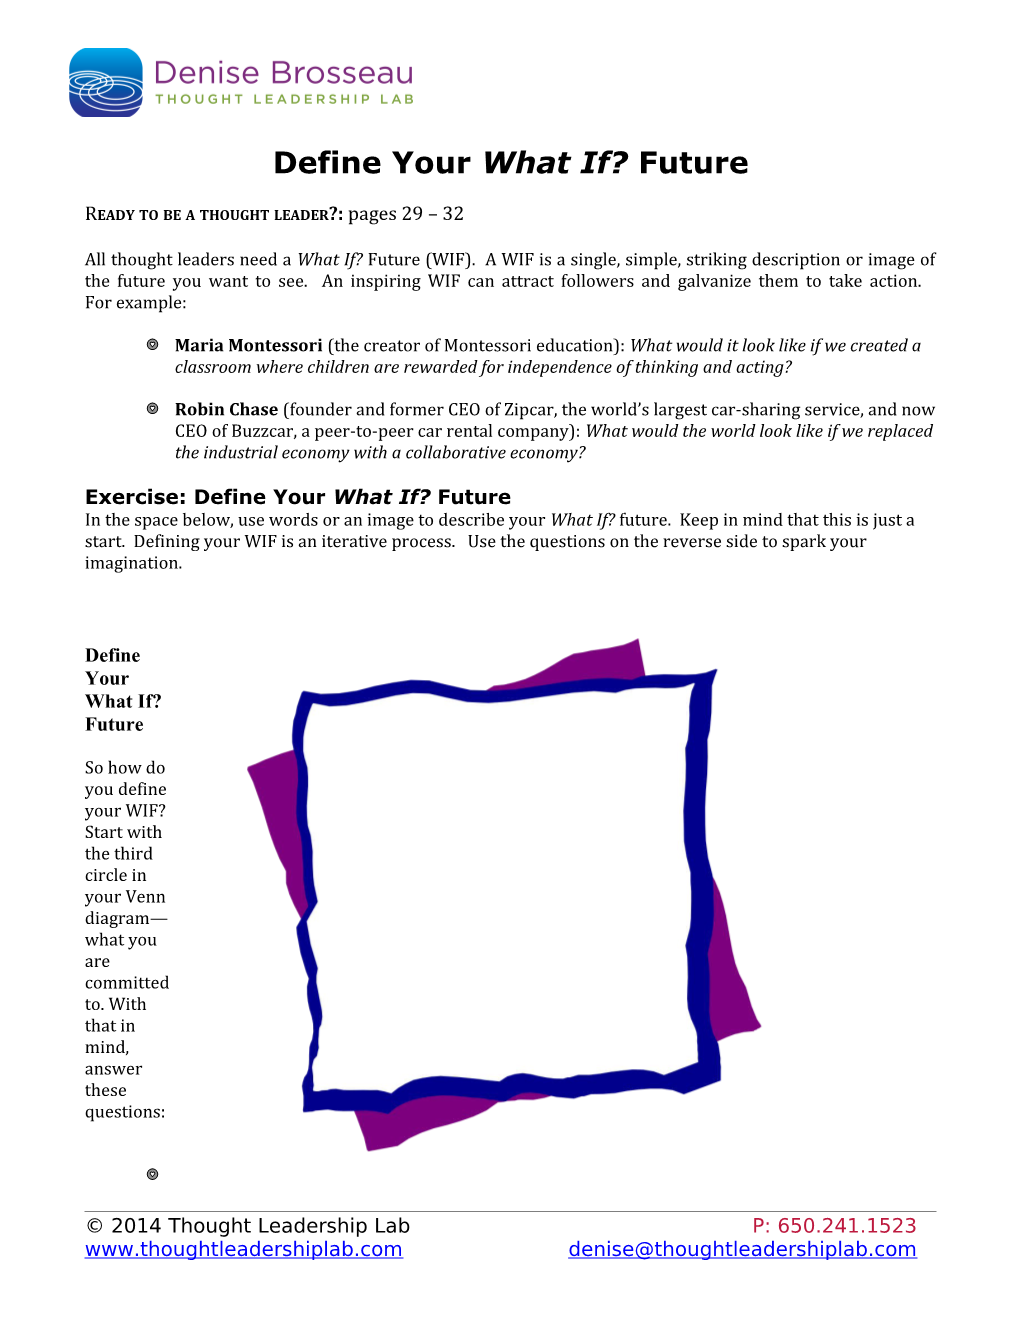 Define Your What If? Future